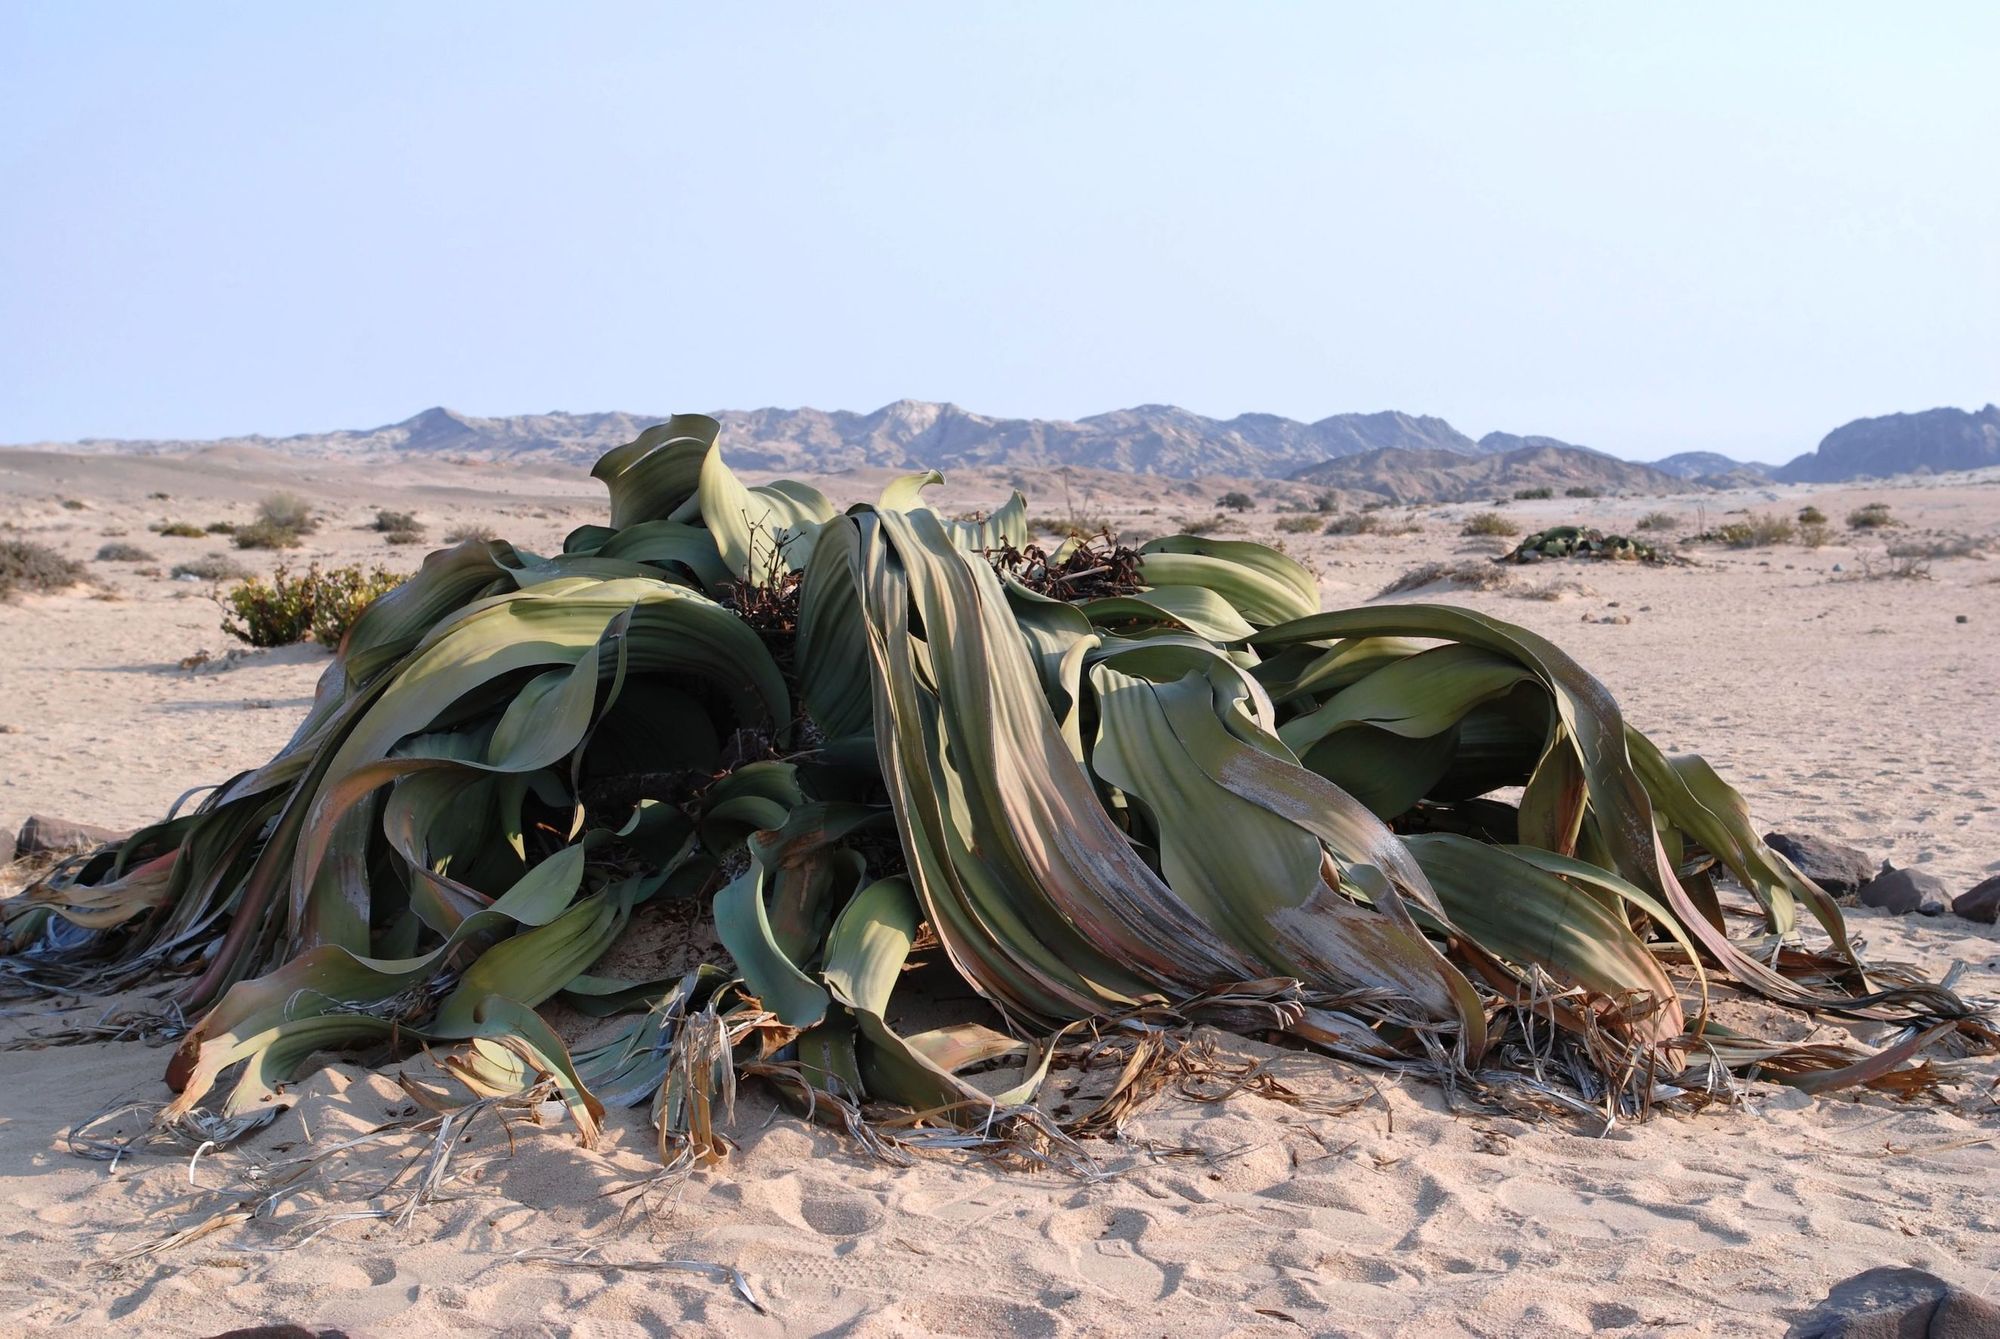 The bizarre-looking welwitschia plants are unique to the Namib Desert.